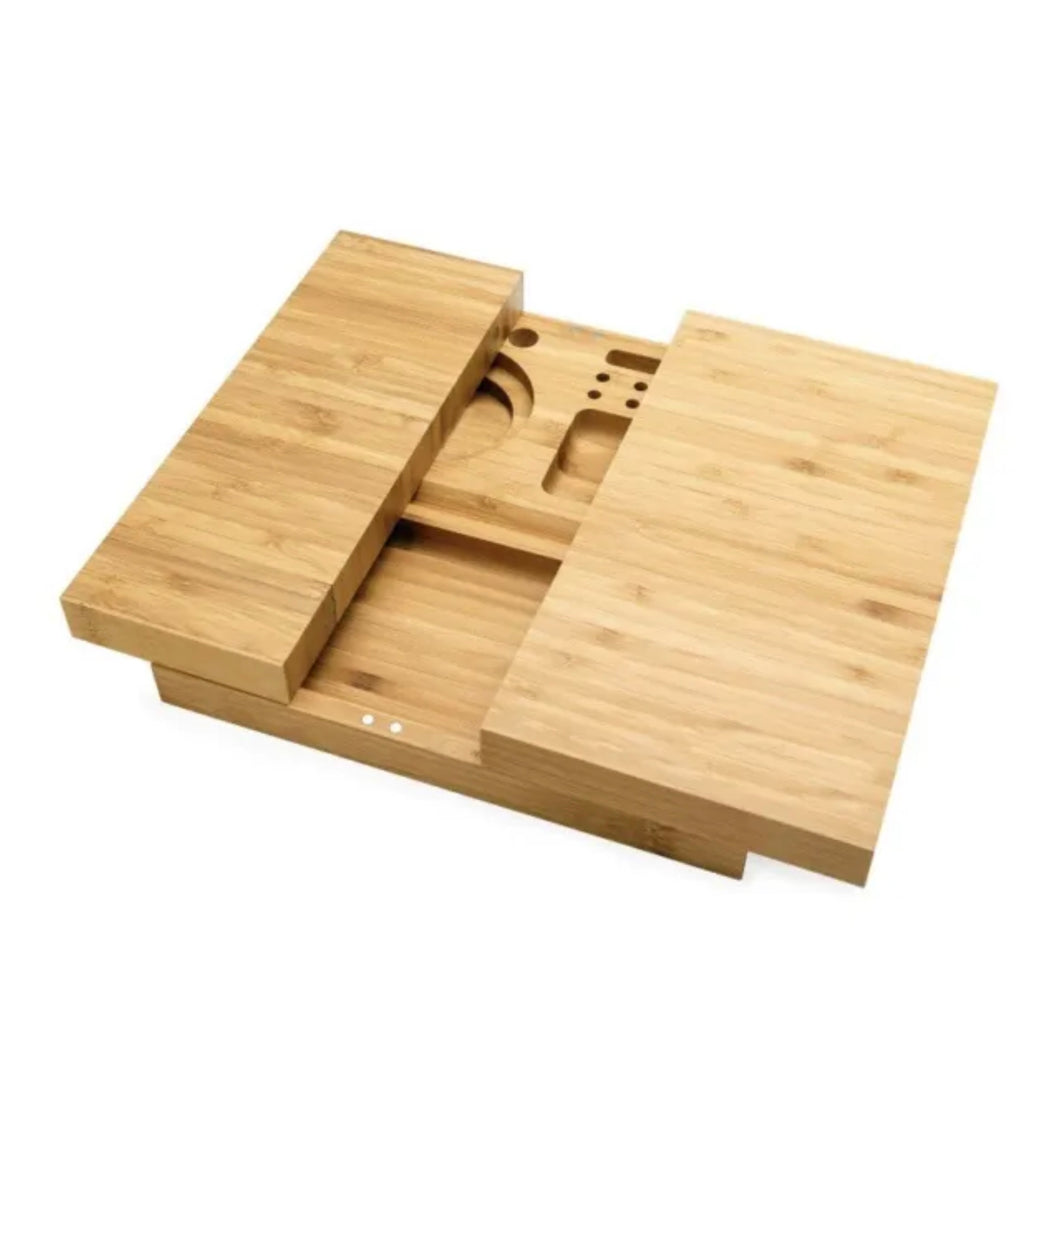 Triple flip bamboo magnet rolling foldable tray